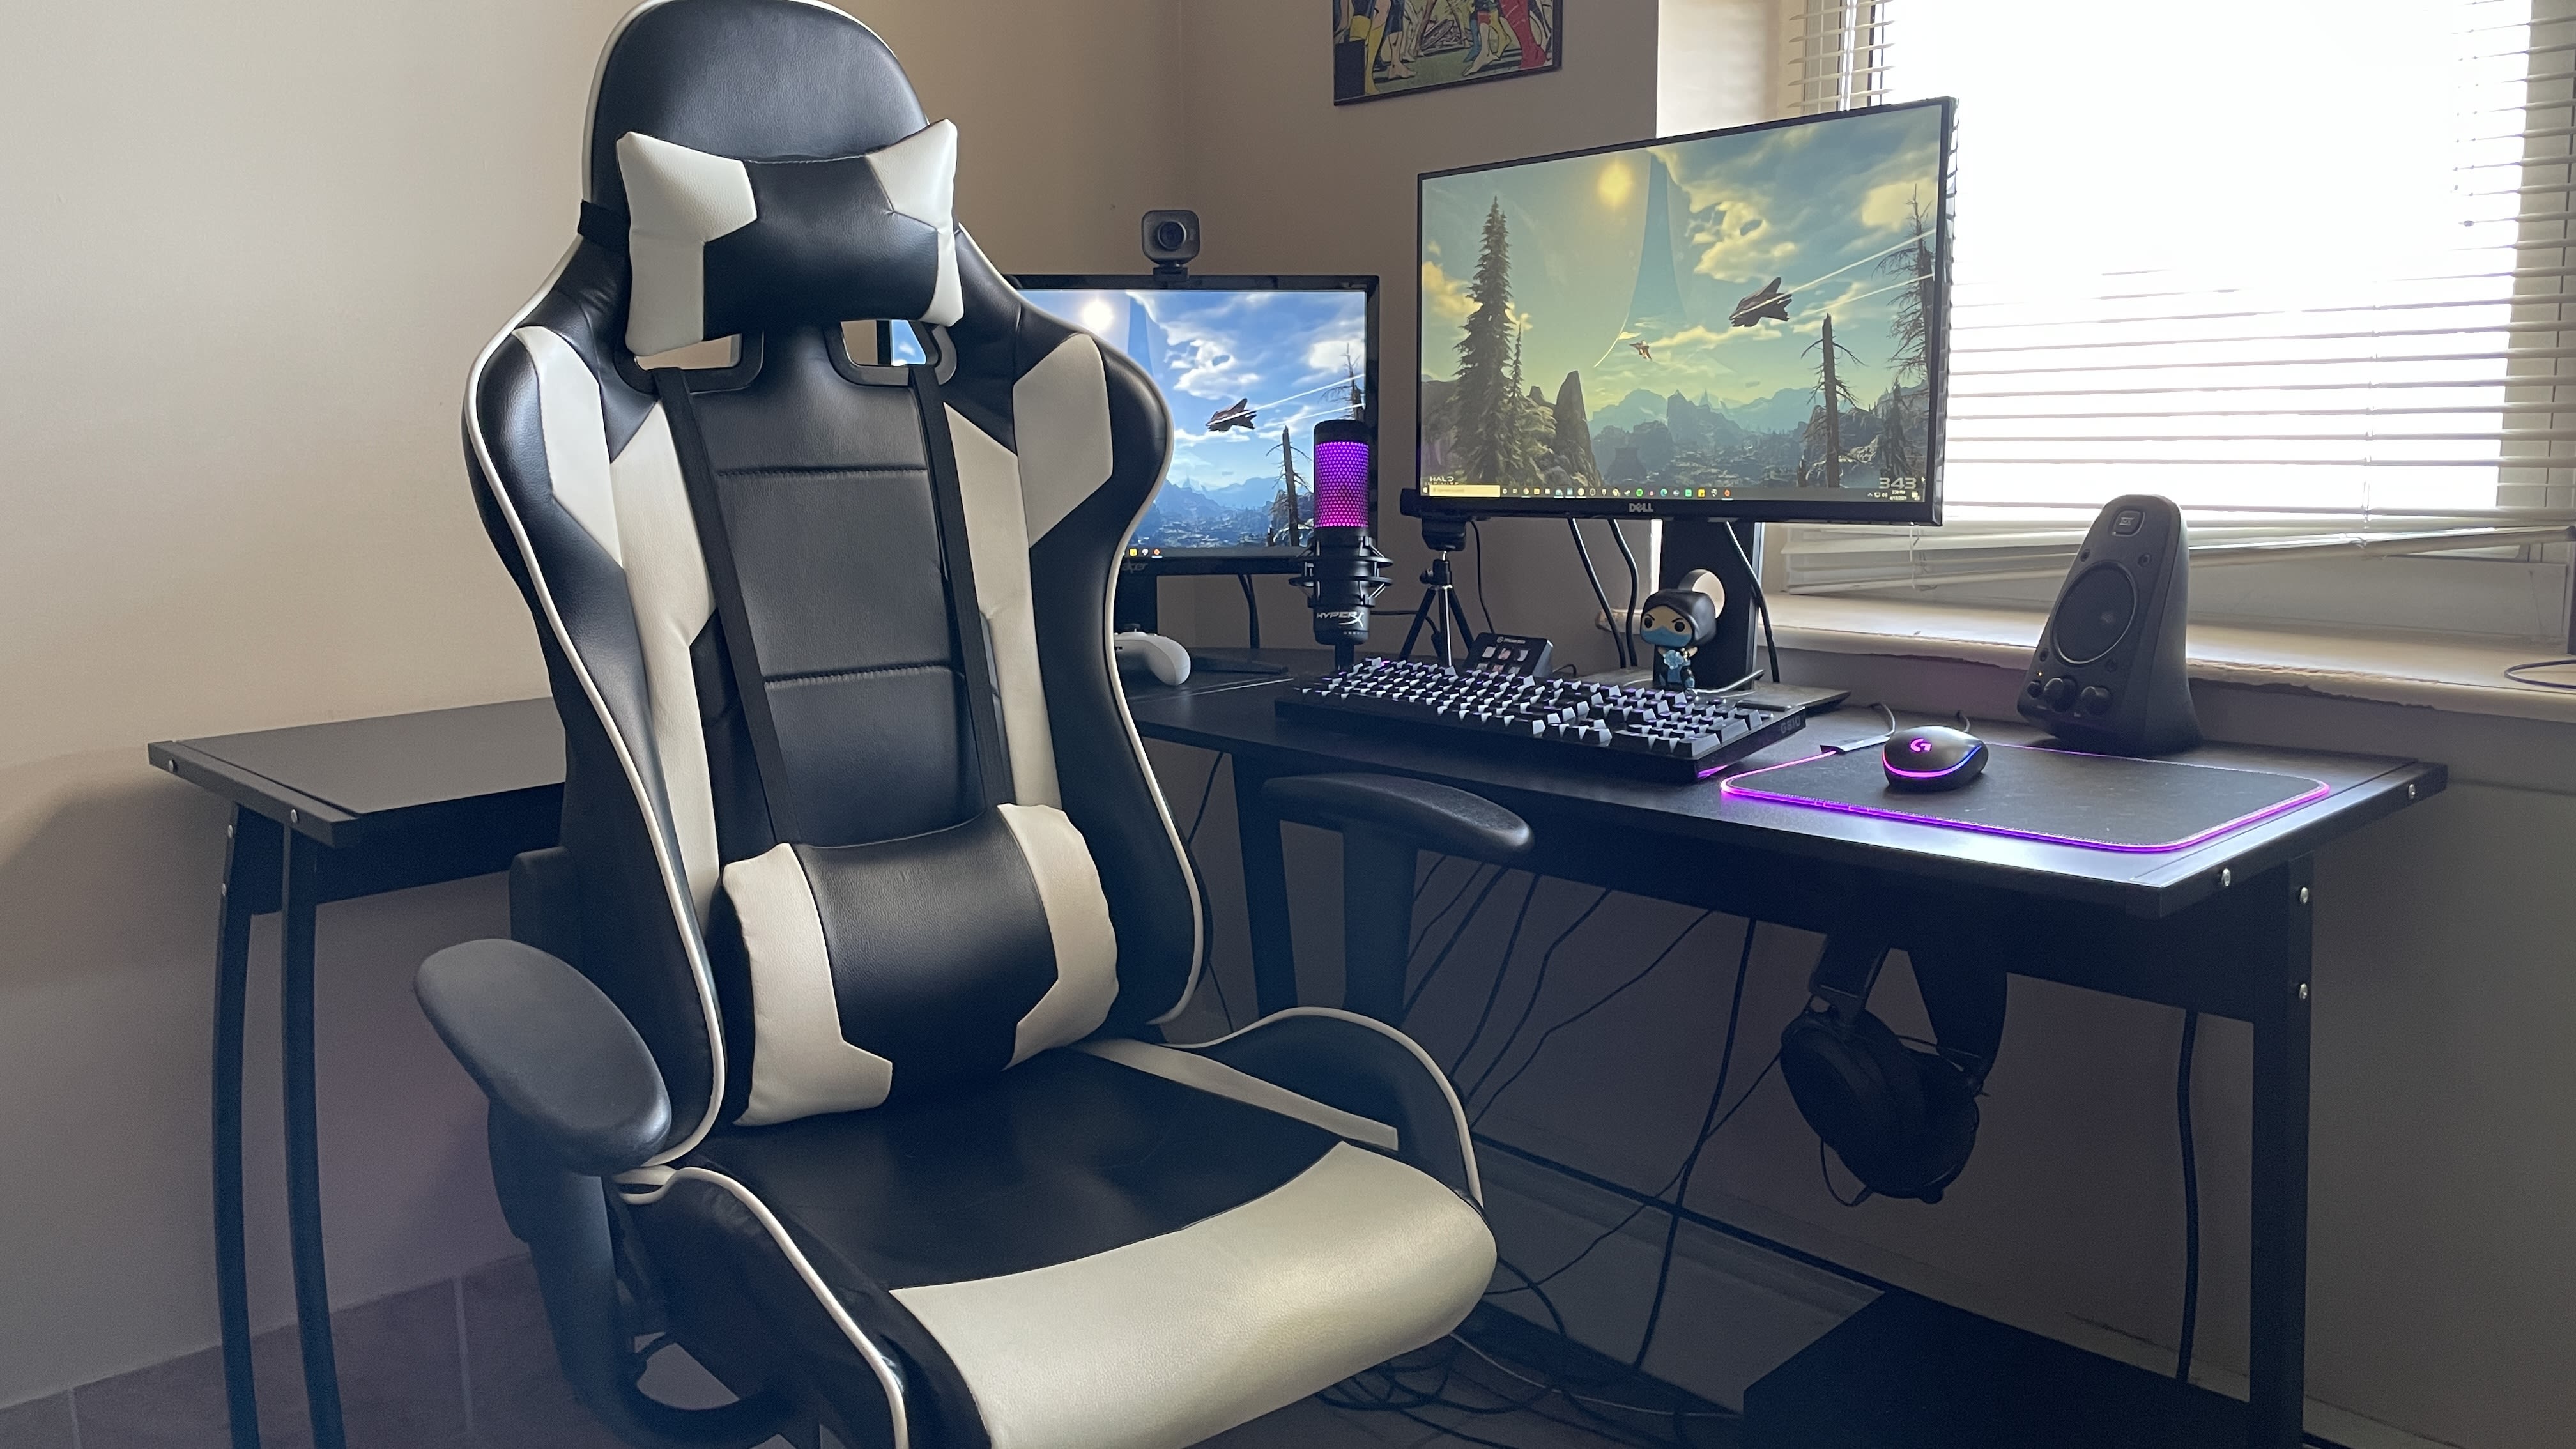 High-quality gaming chairs